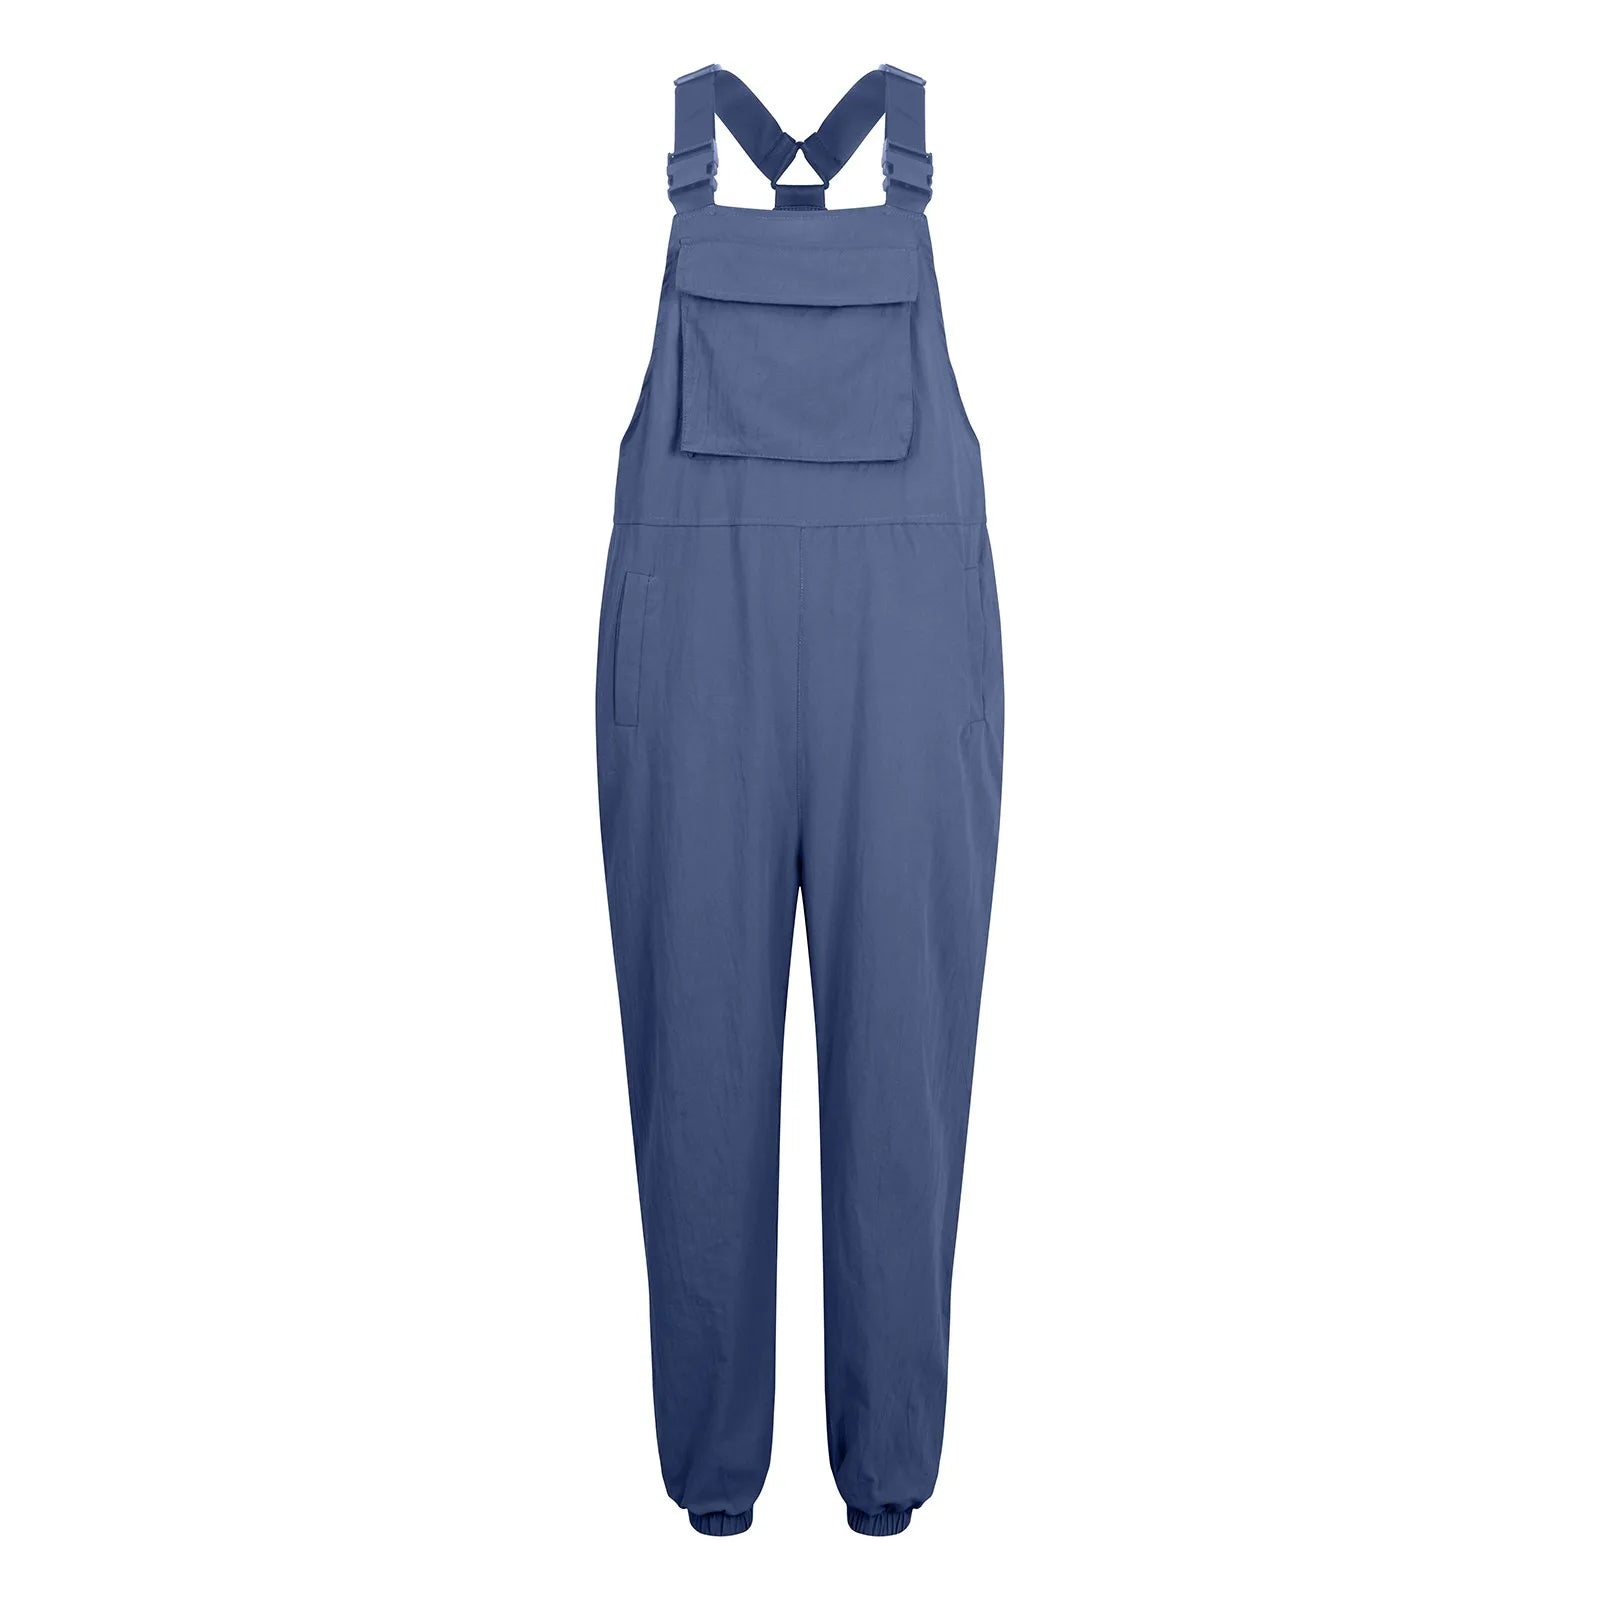 Jumpsuits- Women's Solid Bib Pencil Pantsuits with Multipockets - Baggy Overalls- - Chuzko Women Clothing